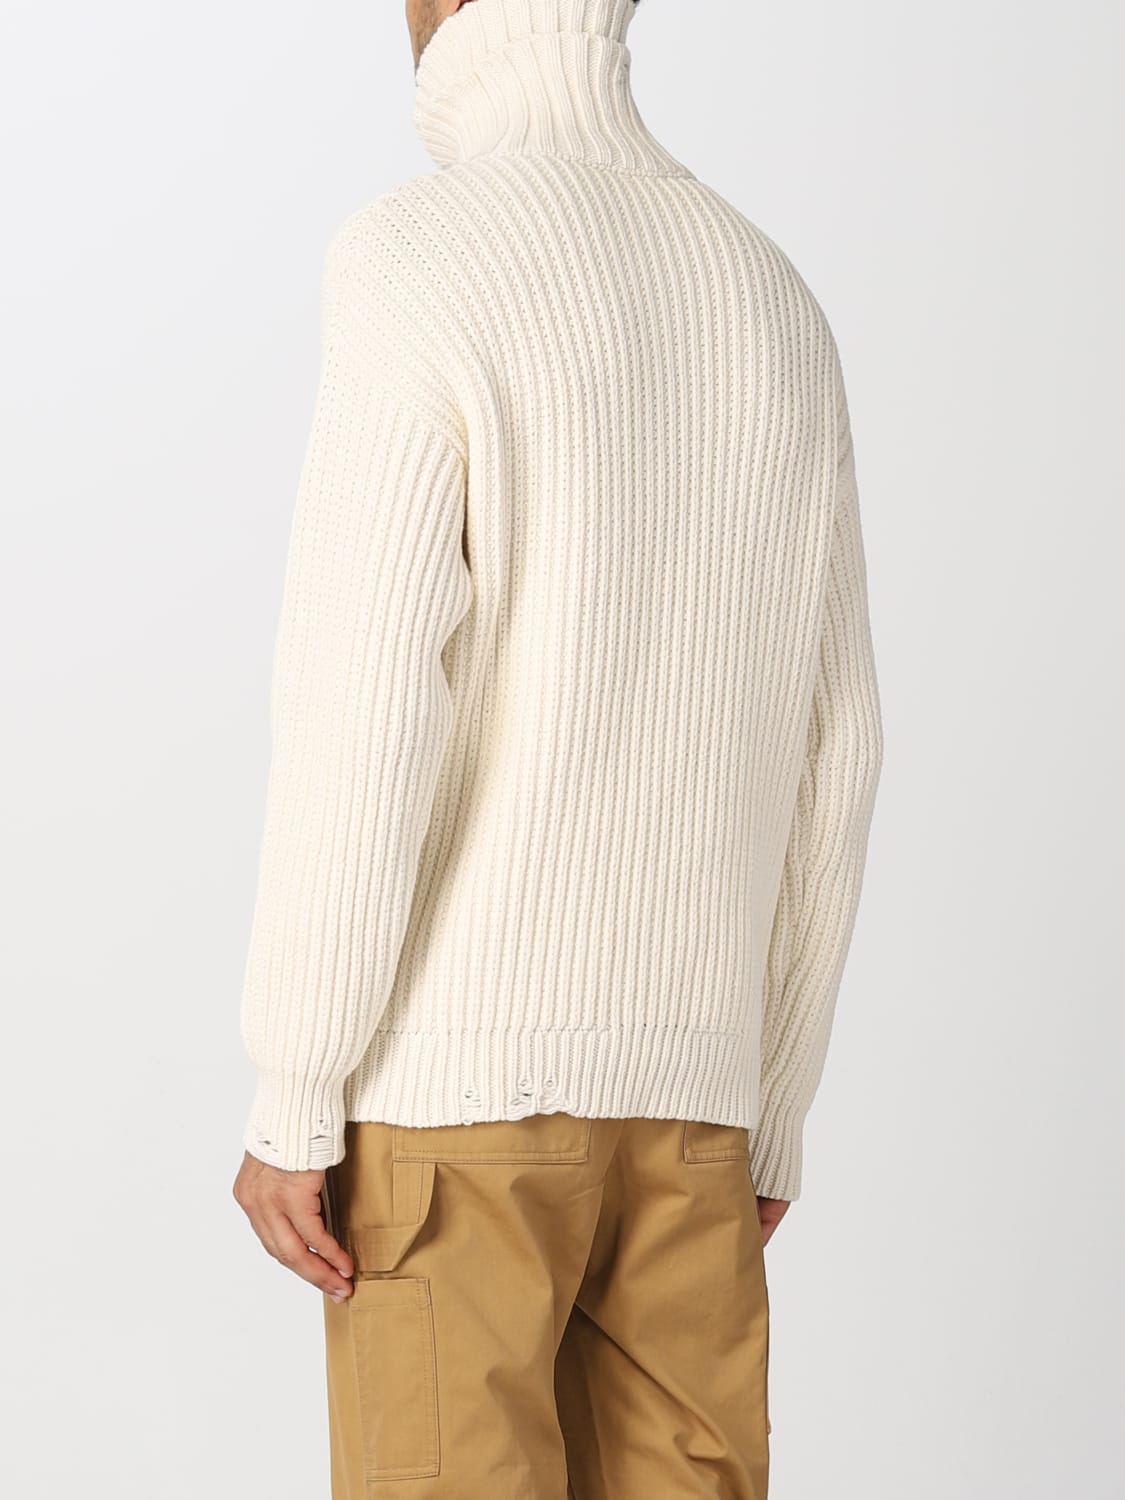 DSQUARED2: sweater for man - White | Dsquared2 sweater S74HA1350S18299 ...